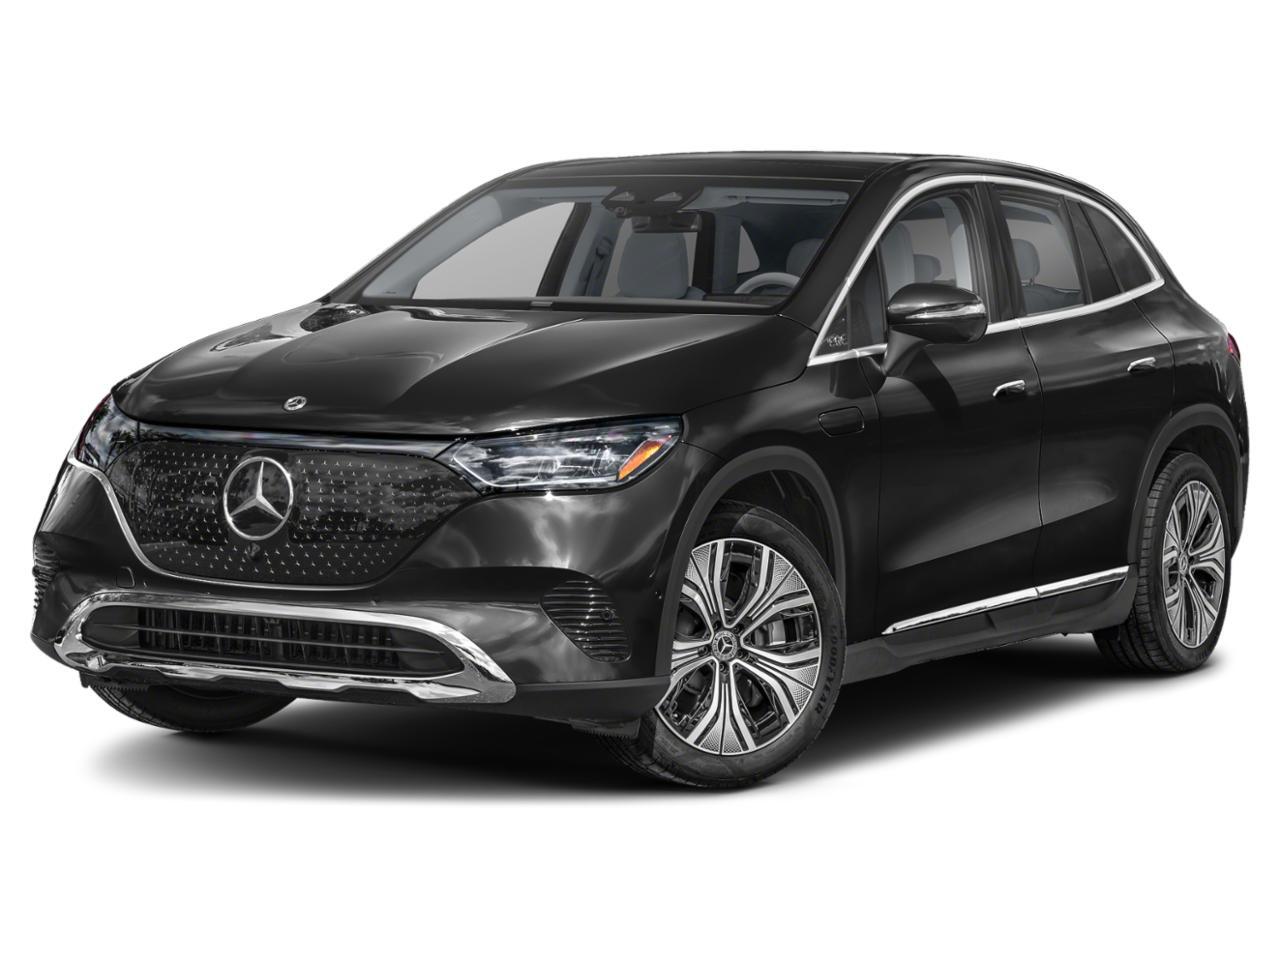 2023 Mercedes-Benz EQE 350 4MATIC SUV (Post-August Production)